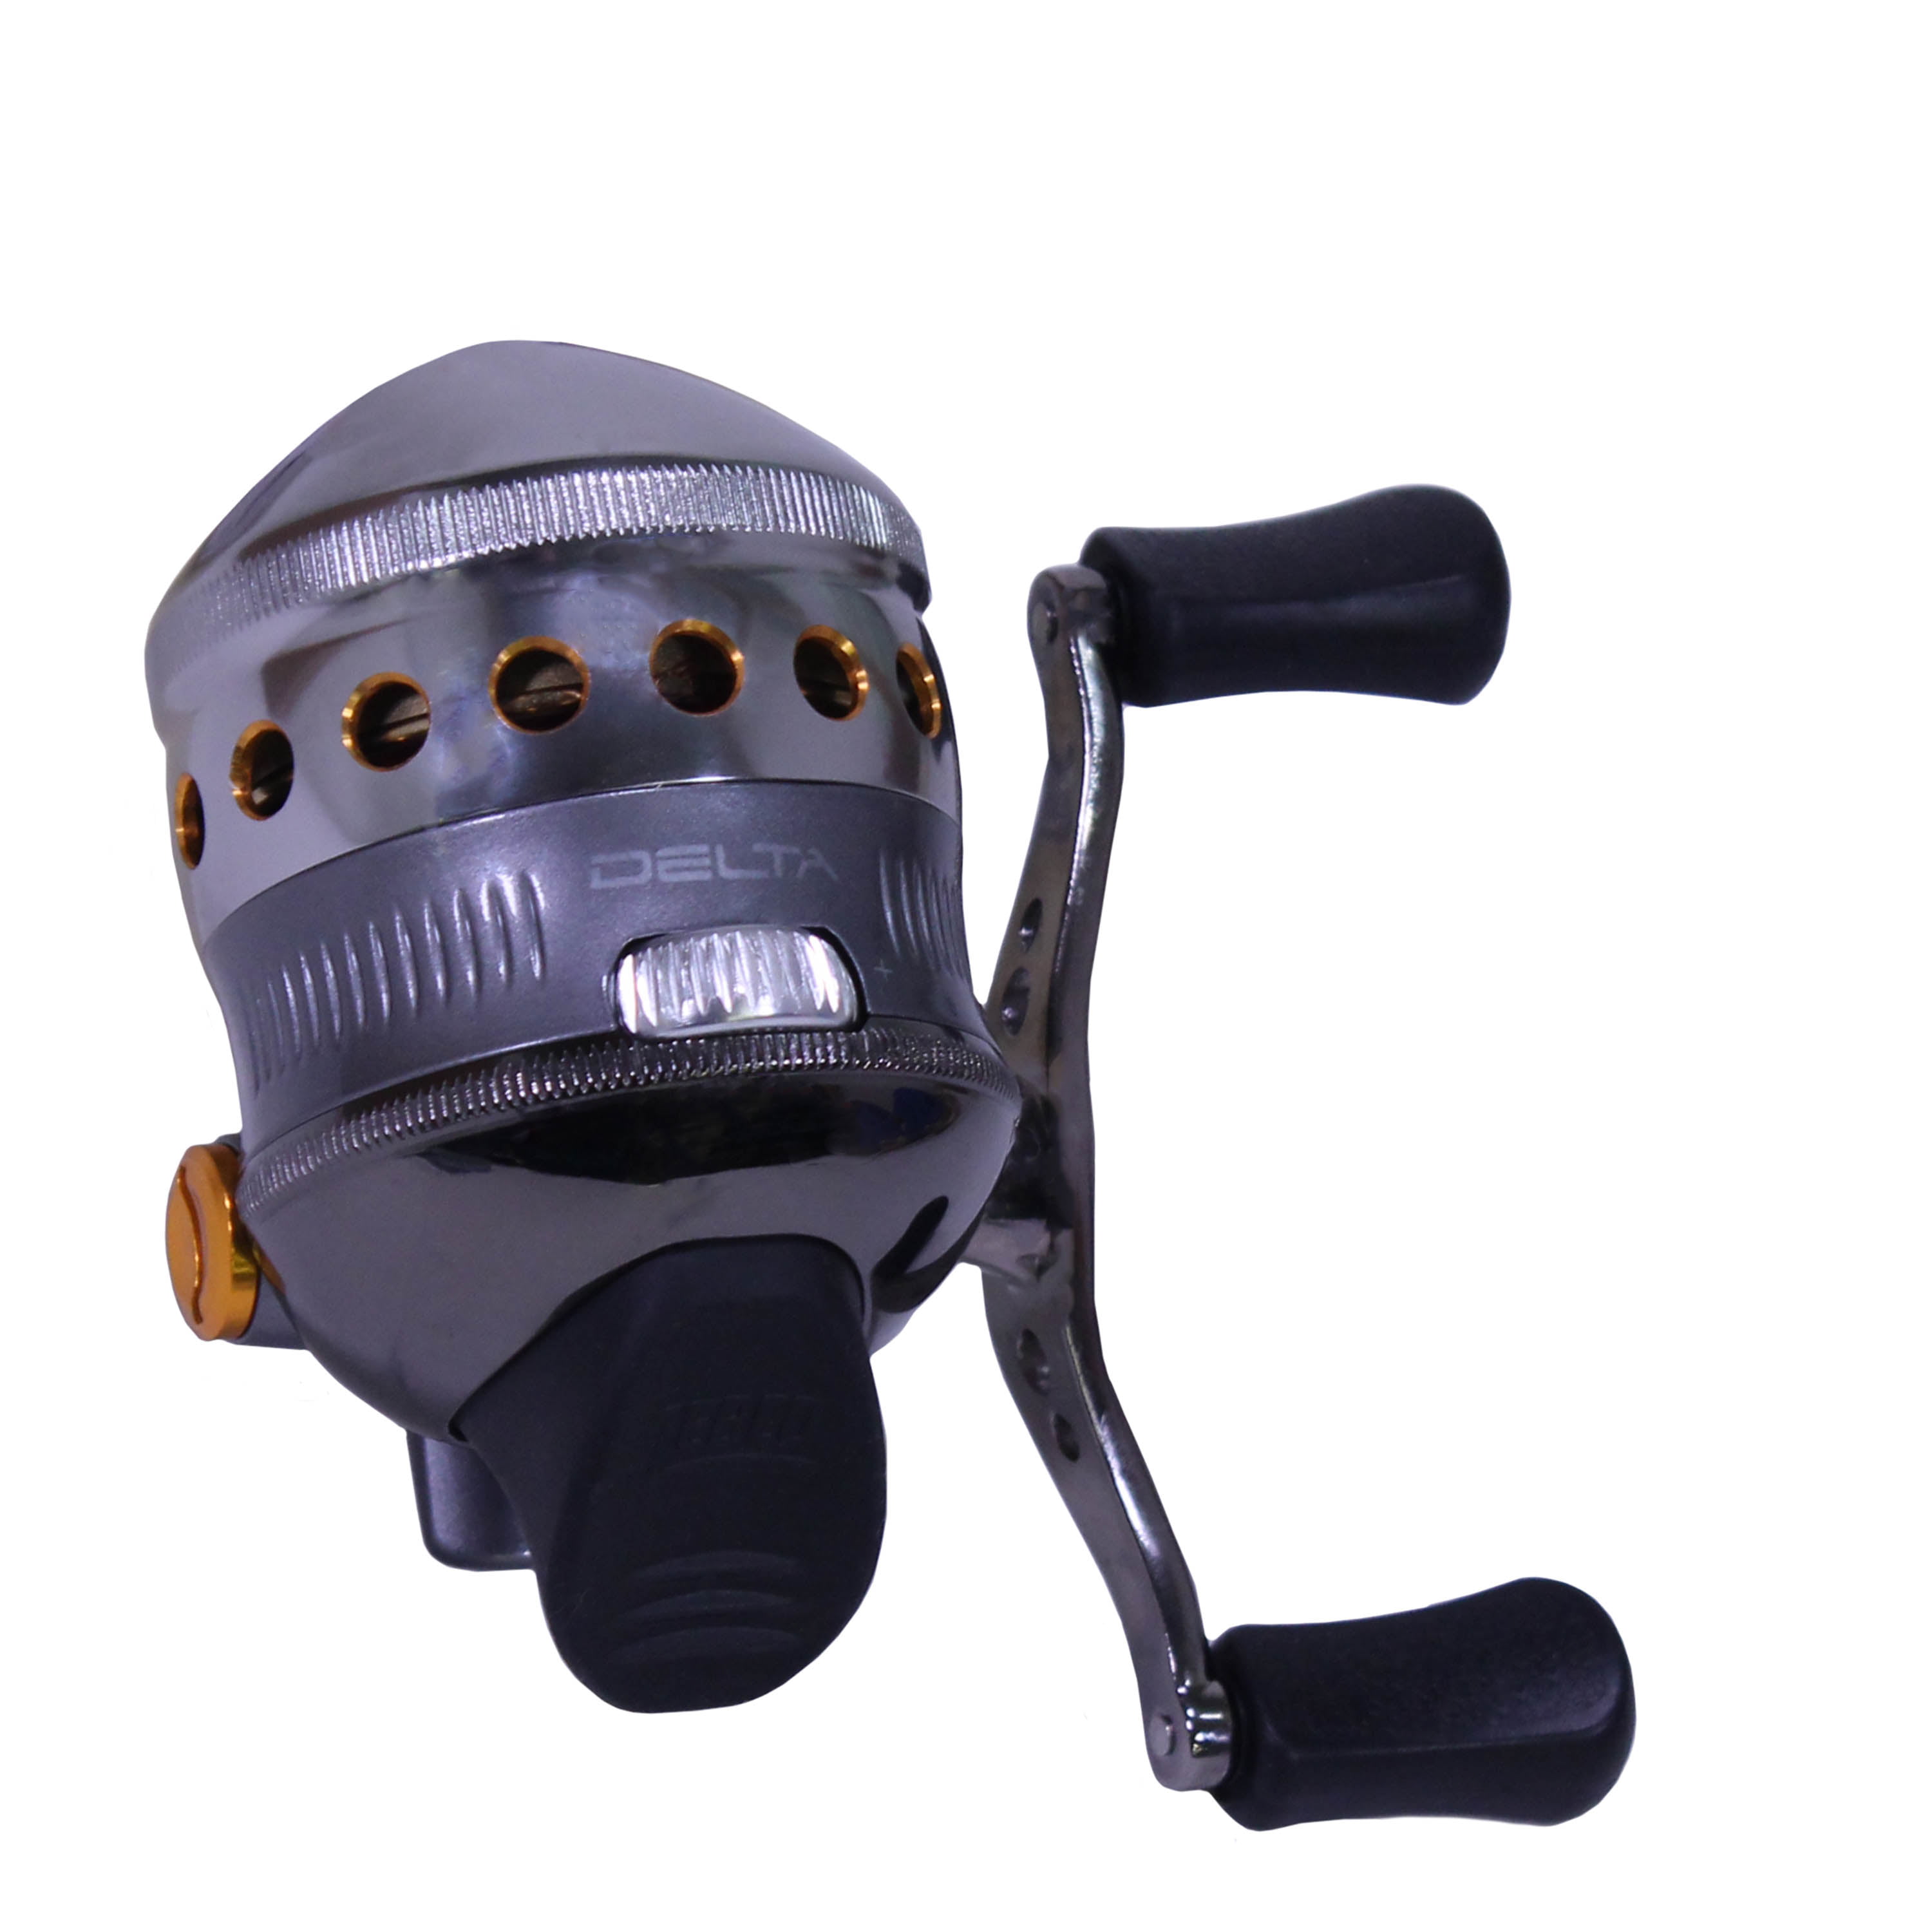 Zebco Bullet Spincast Fishing Reel, 8+1 Ball Bearings with an 